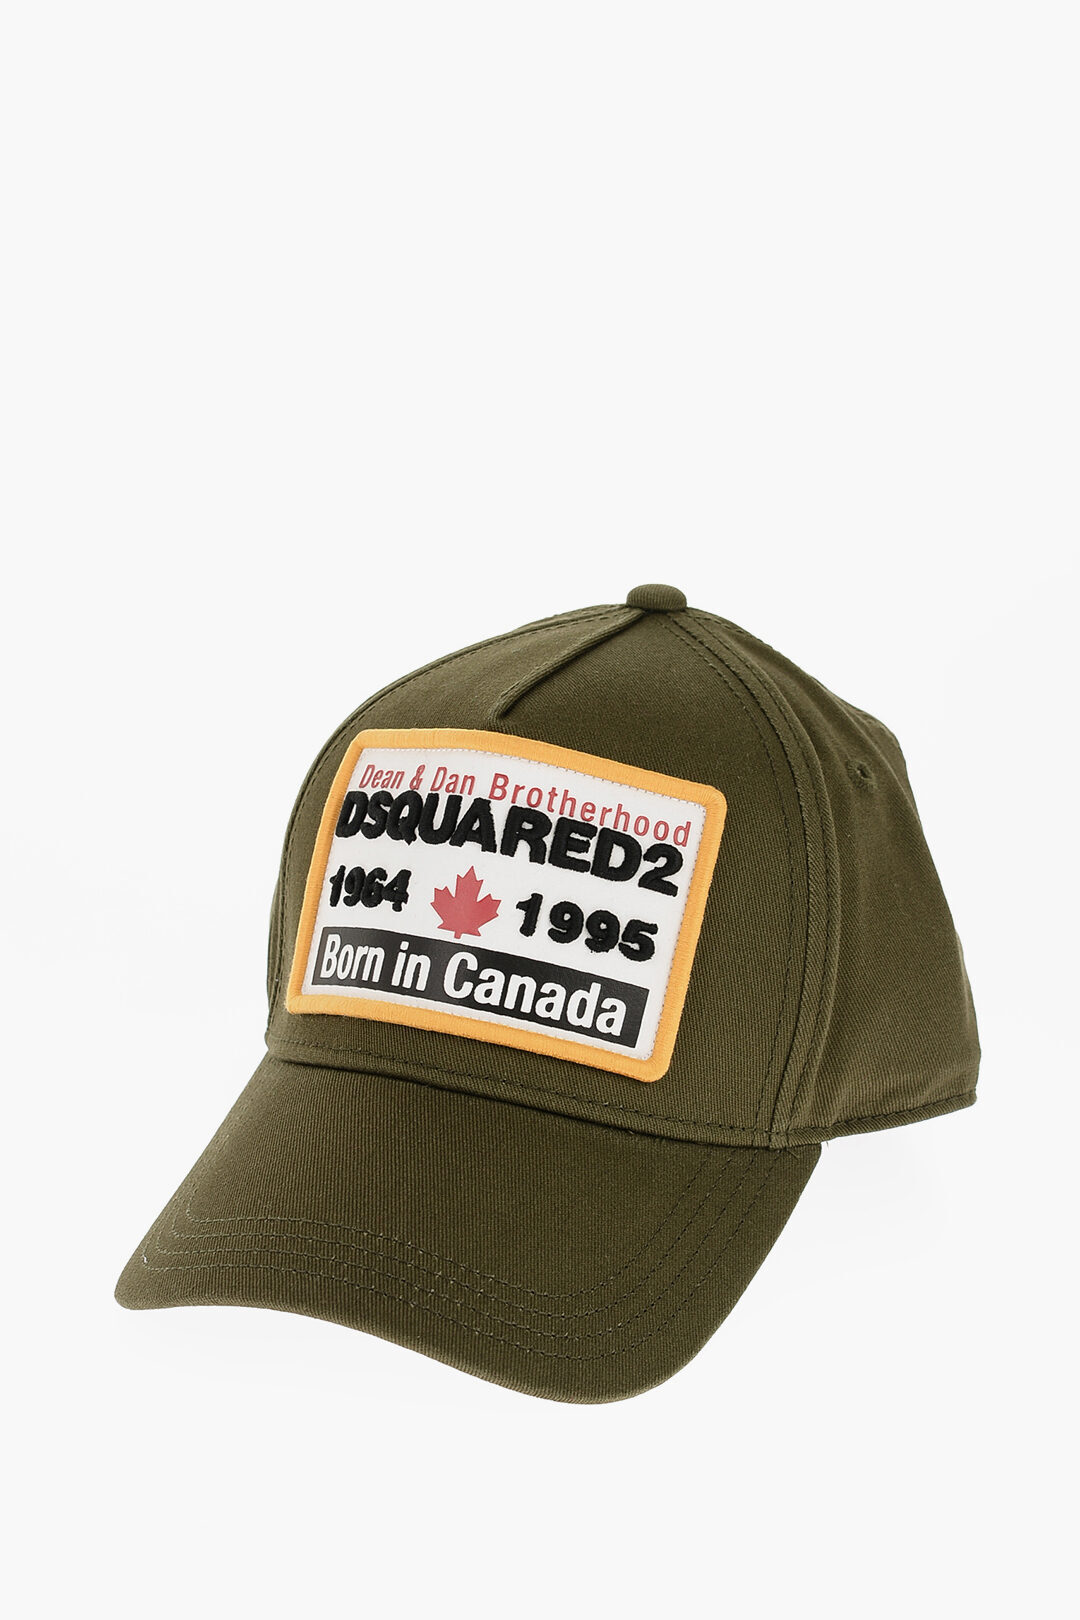 DSQUARED2 ディースクエアード 帽子 DQ1274 D00YT DQ561 ボーイズ SOLID COLOR CAP WITH EMBOSSED LOGO..